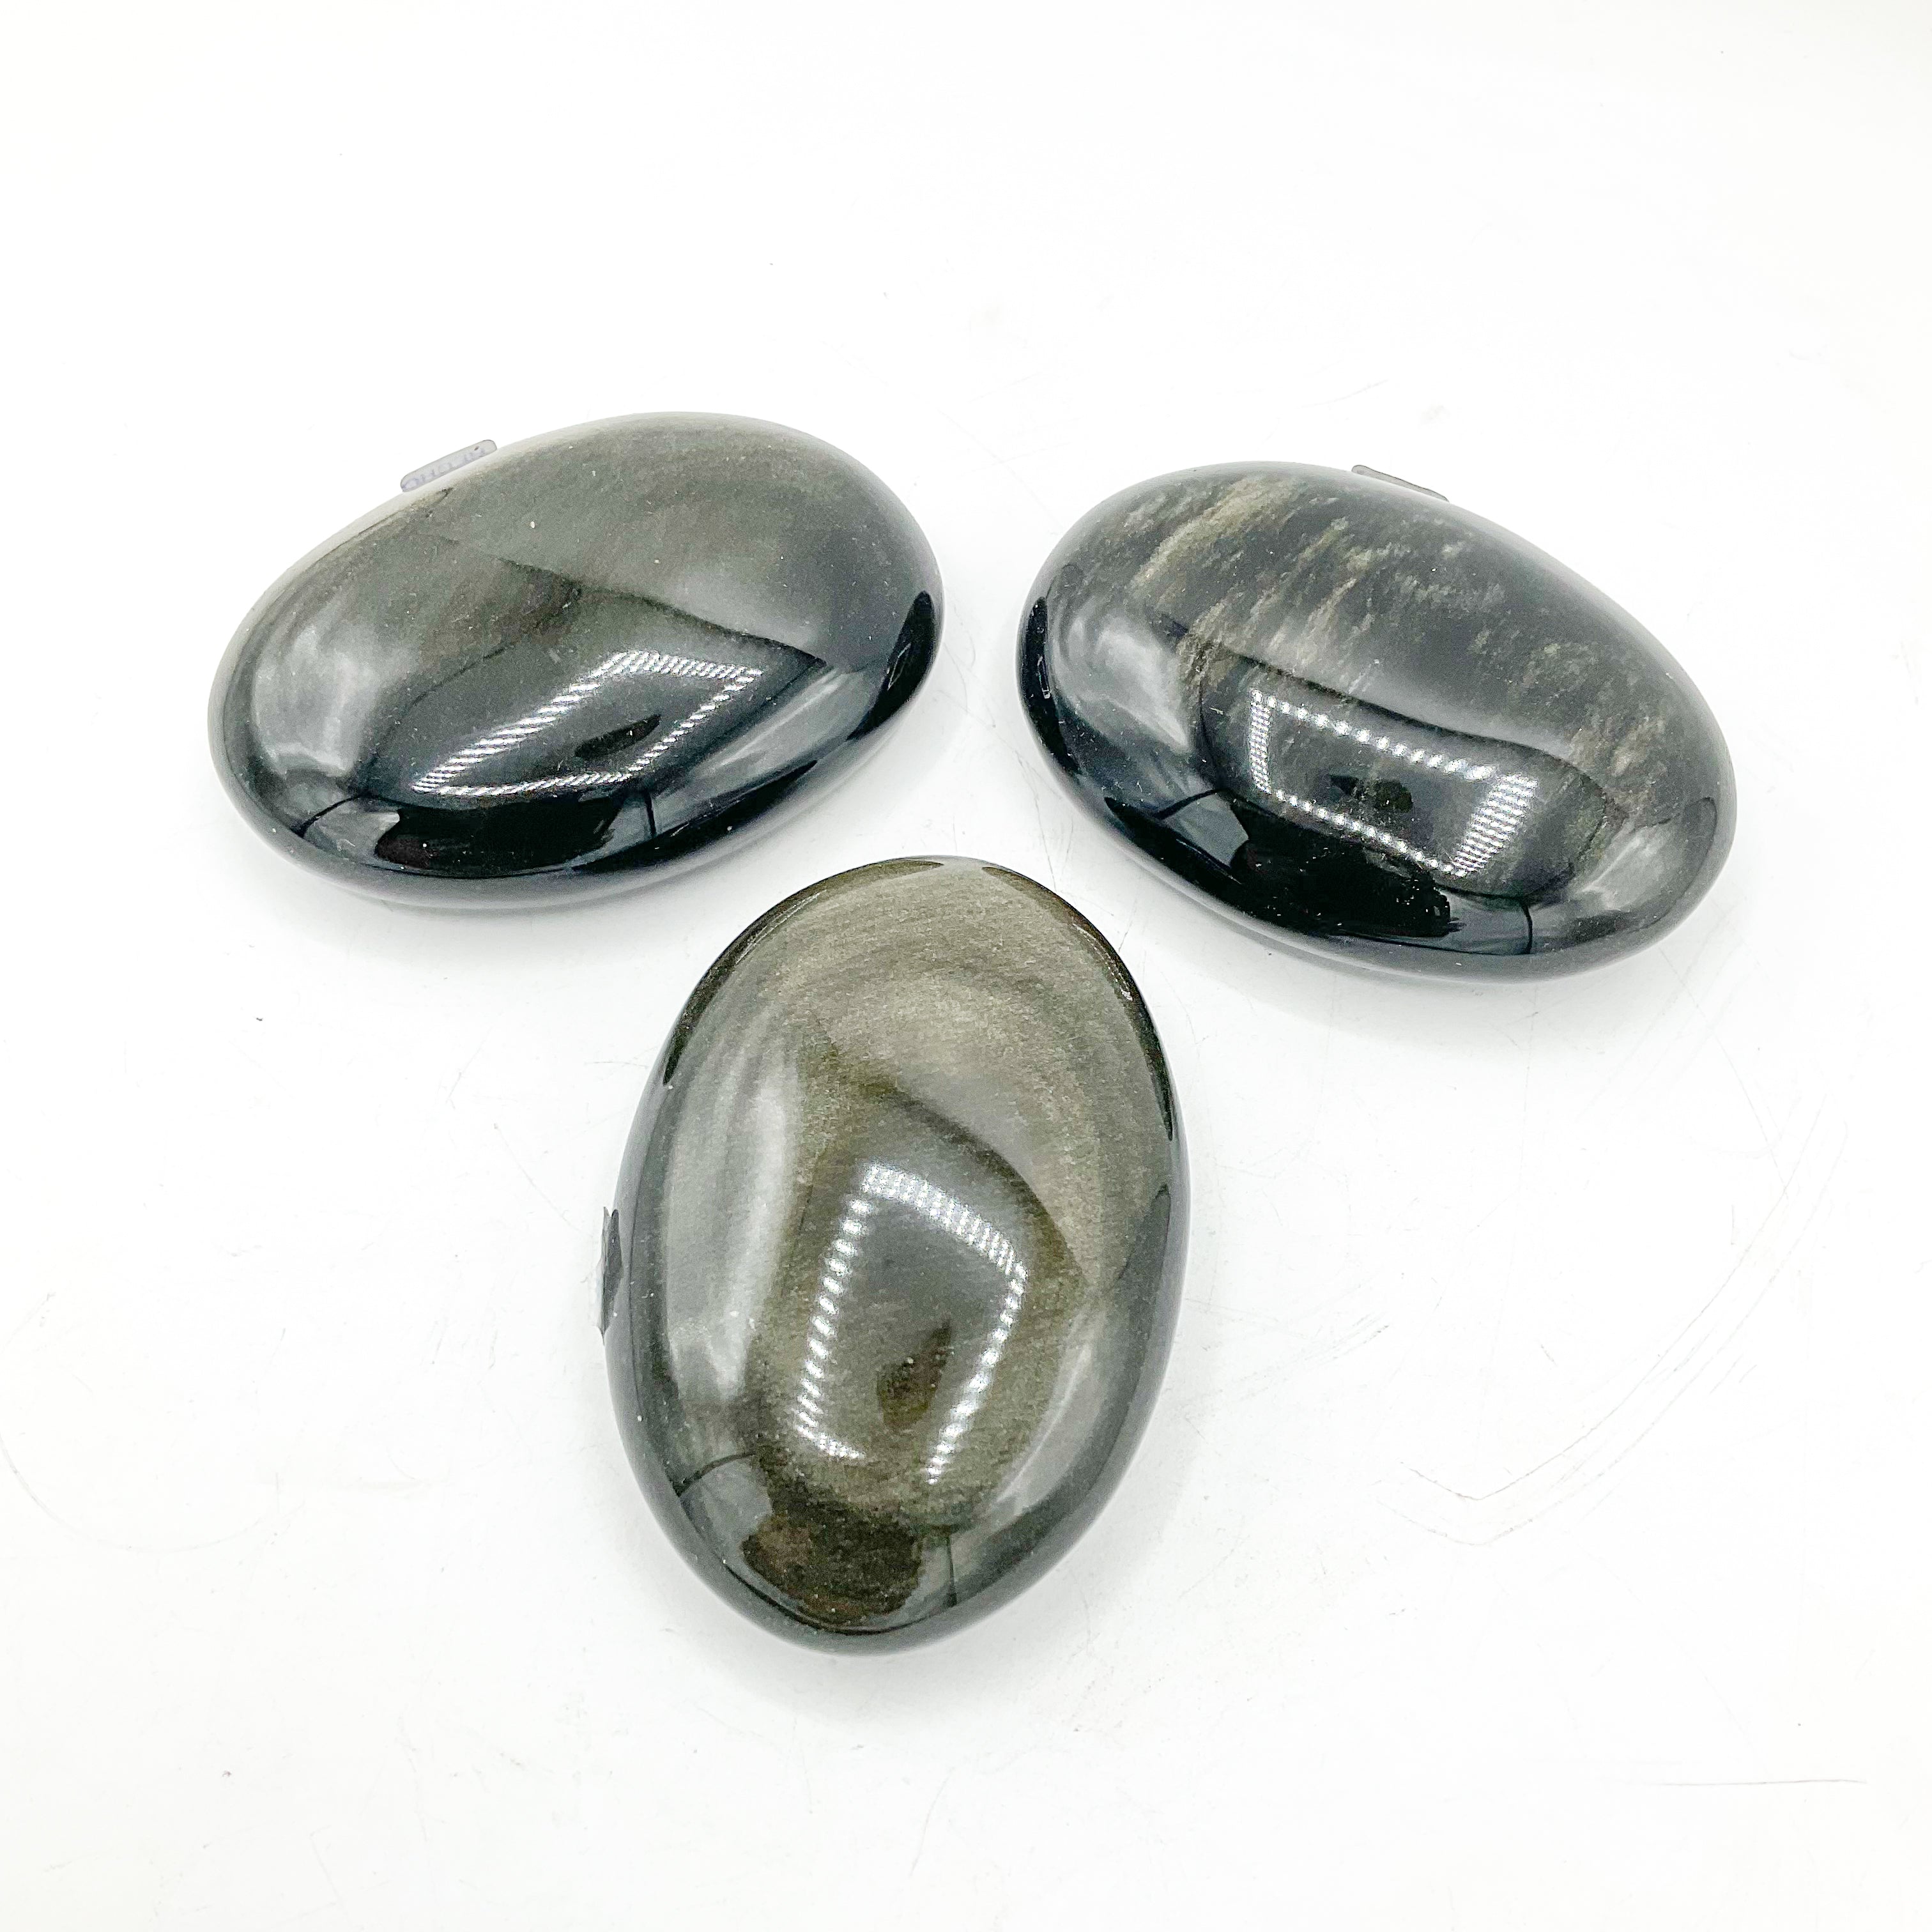 Gold sheen obsidian palm stone carvings crystal healing mexico genuine crystals real authentic obsidian